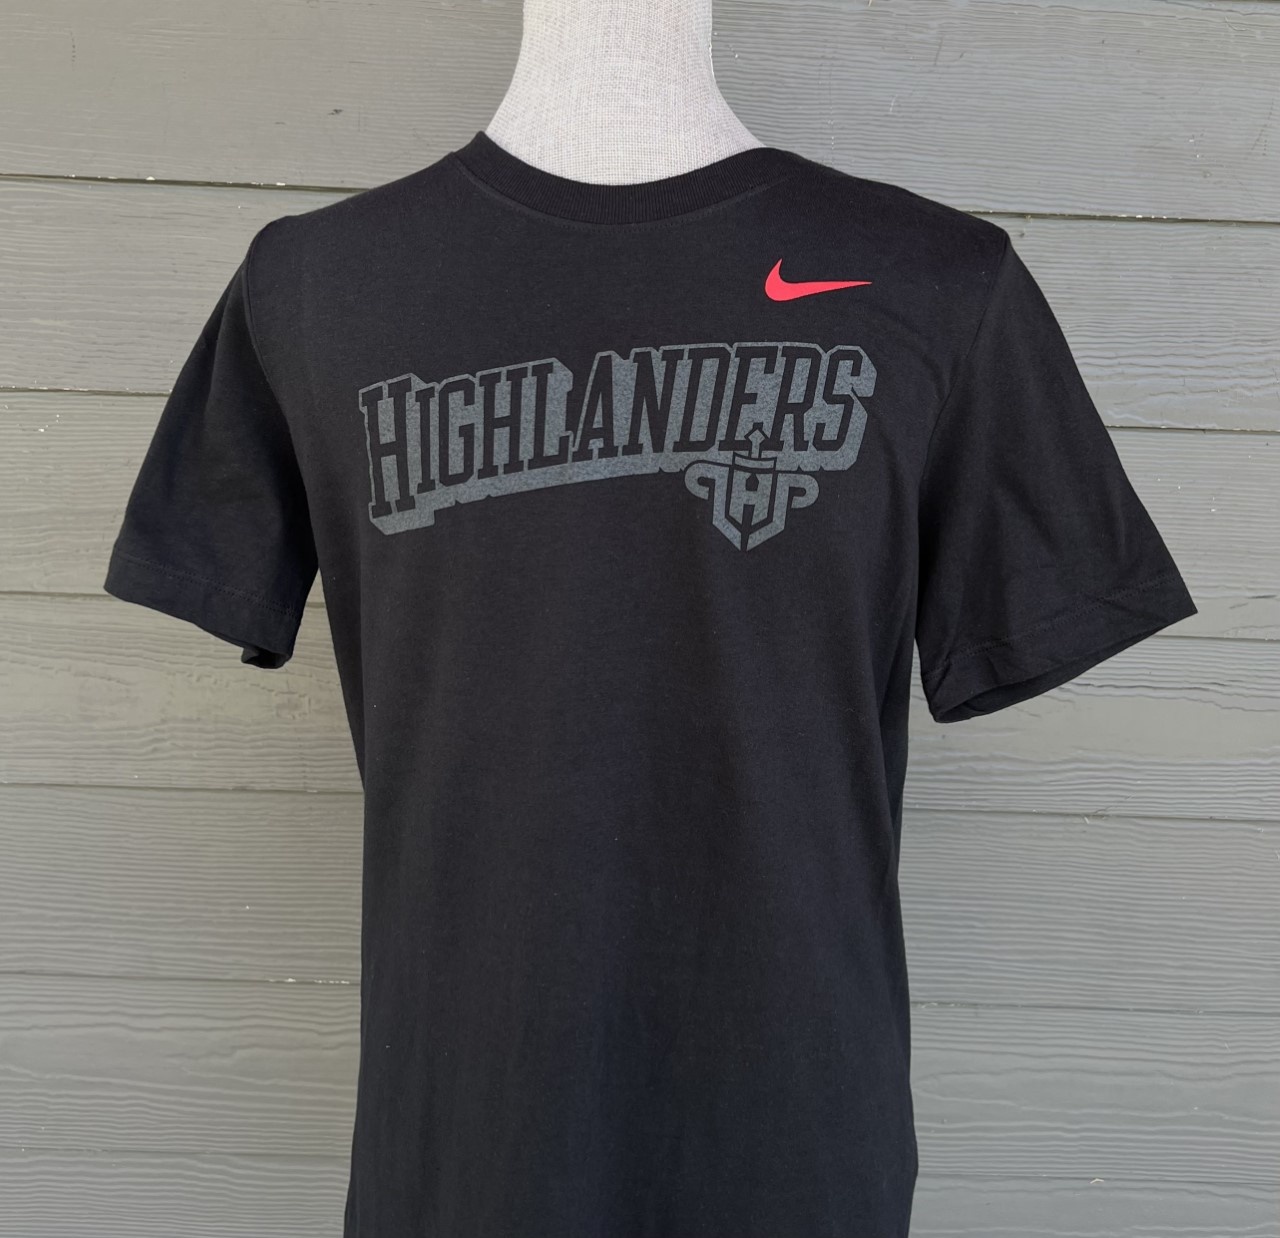 Nike Youth SS Cotton Tee Highlanders w/LHPLogo in Silver 22